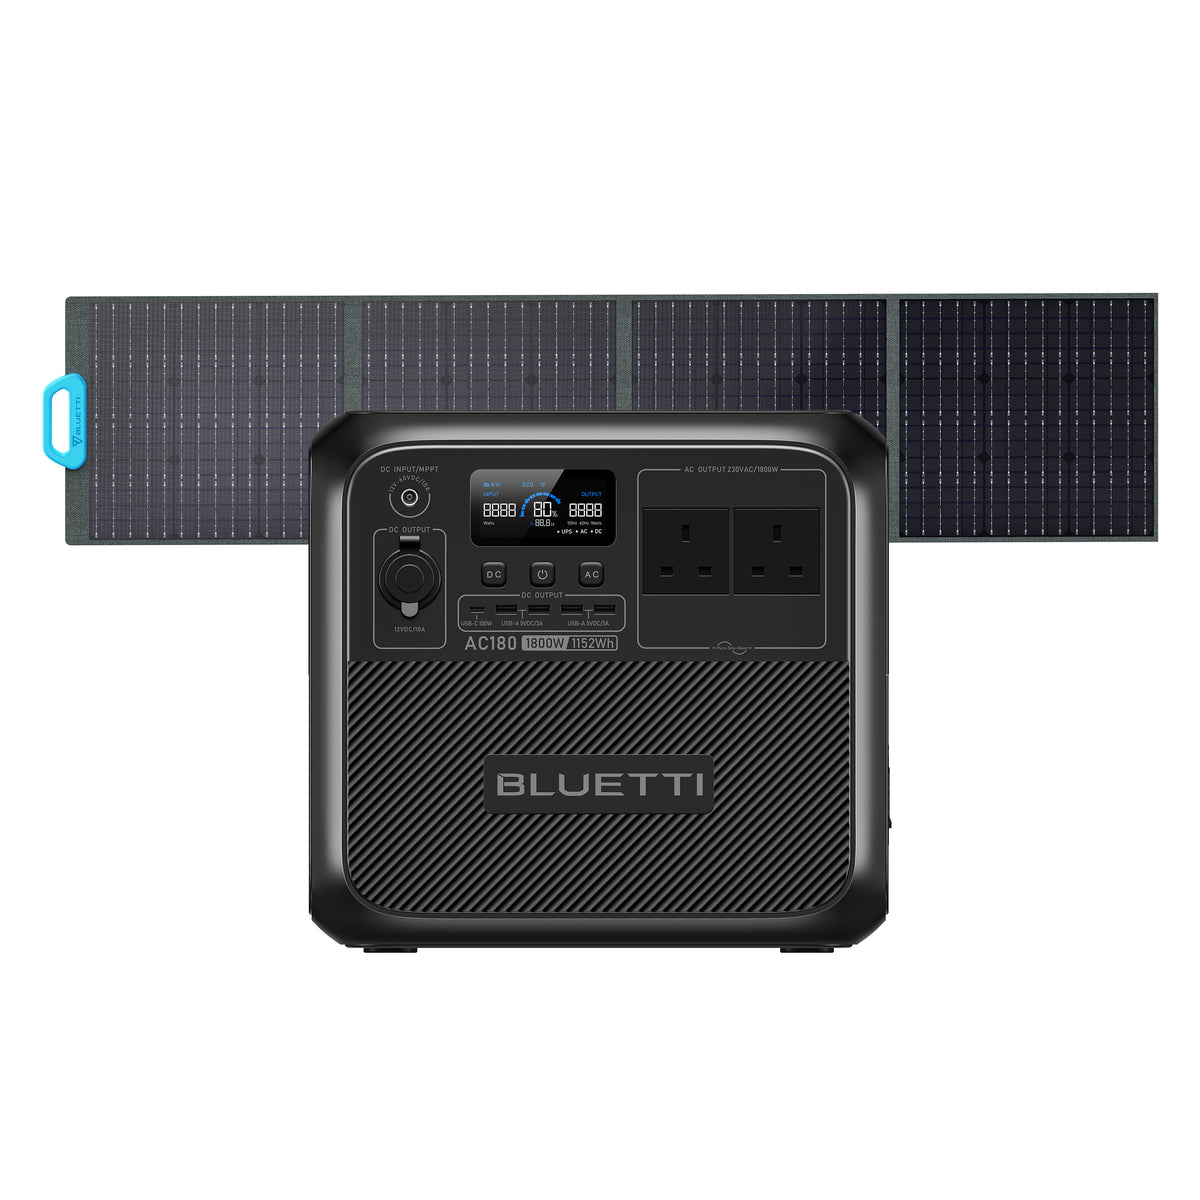 BLUETTI Portable Power Station AC180, 1152Wh LiFePO4 Battery Backup w/ 4  1800W (2700W peak) AC Outlets, 0-80% in 45 Min., Solar Generator for  Camping